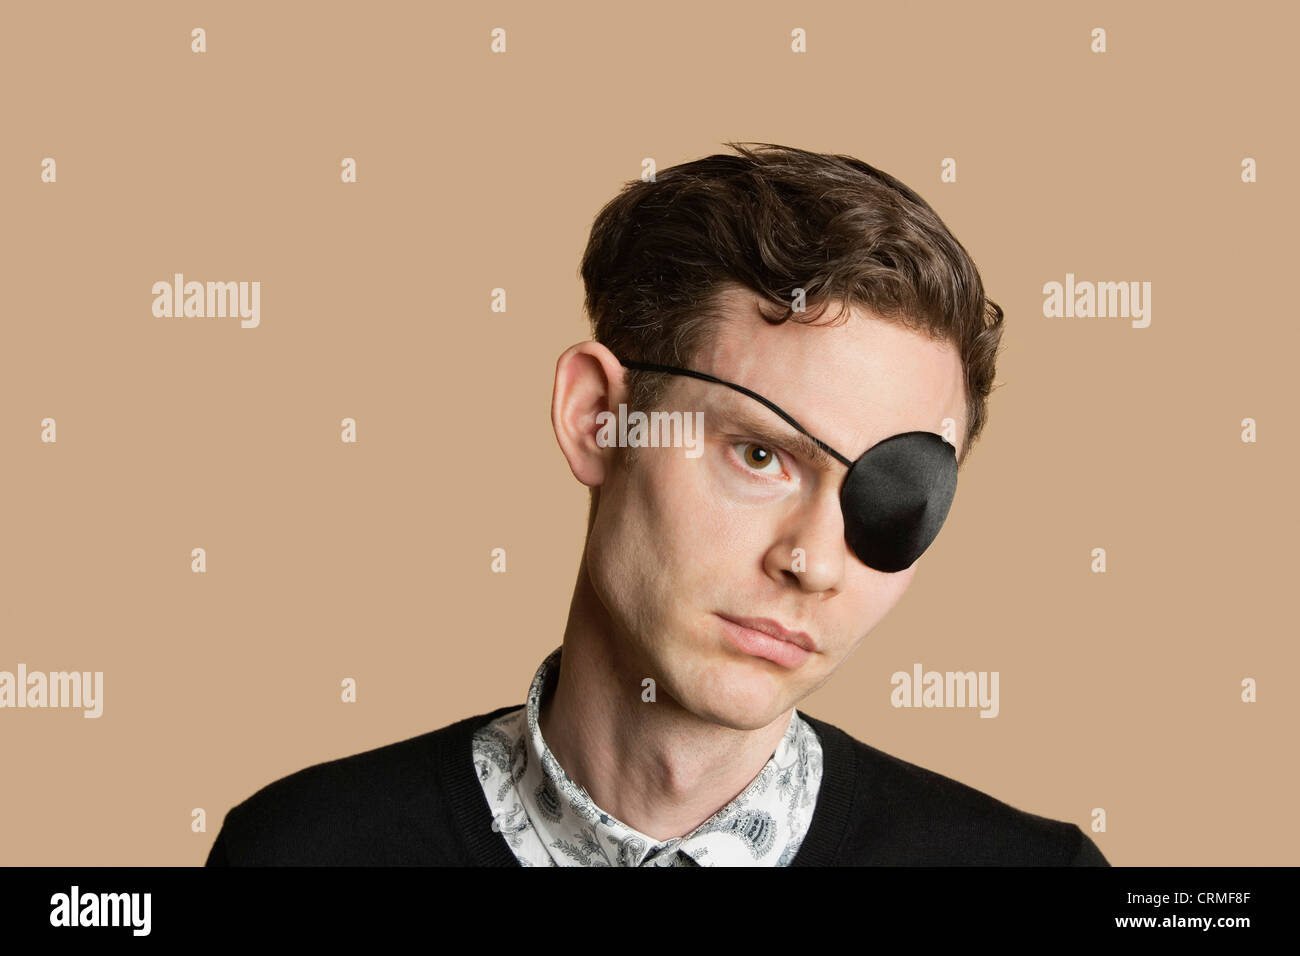 Sad mid adult man wearing eye patch over colored background Stock Photo